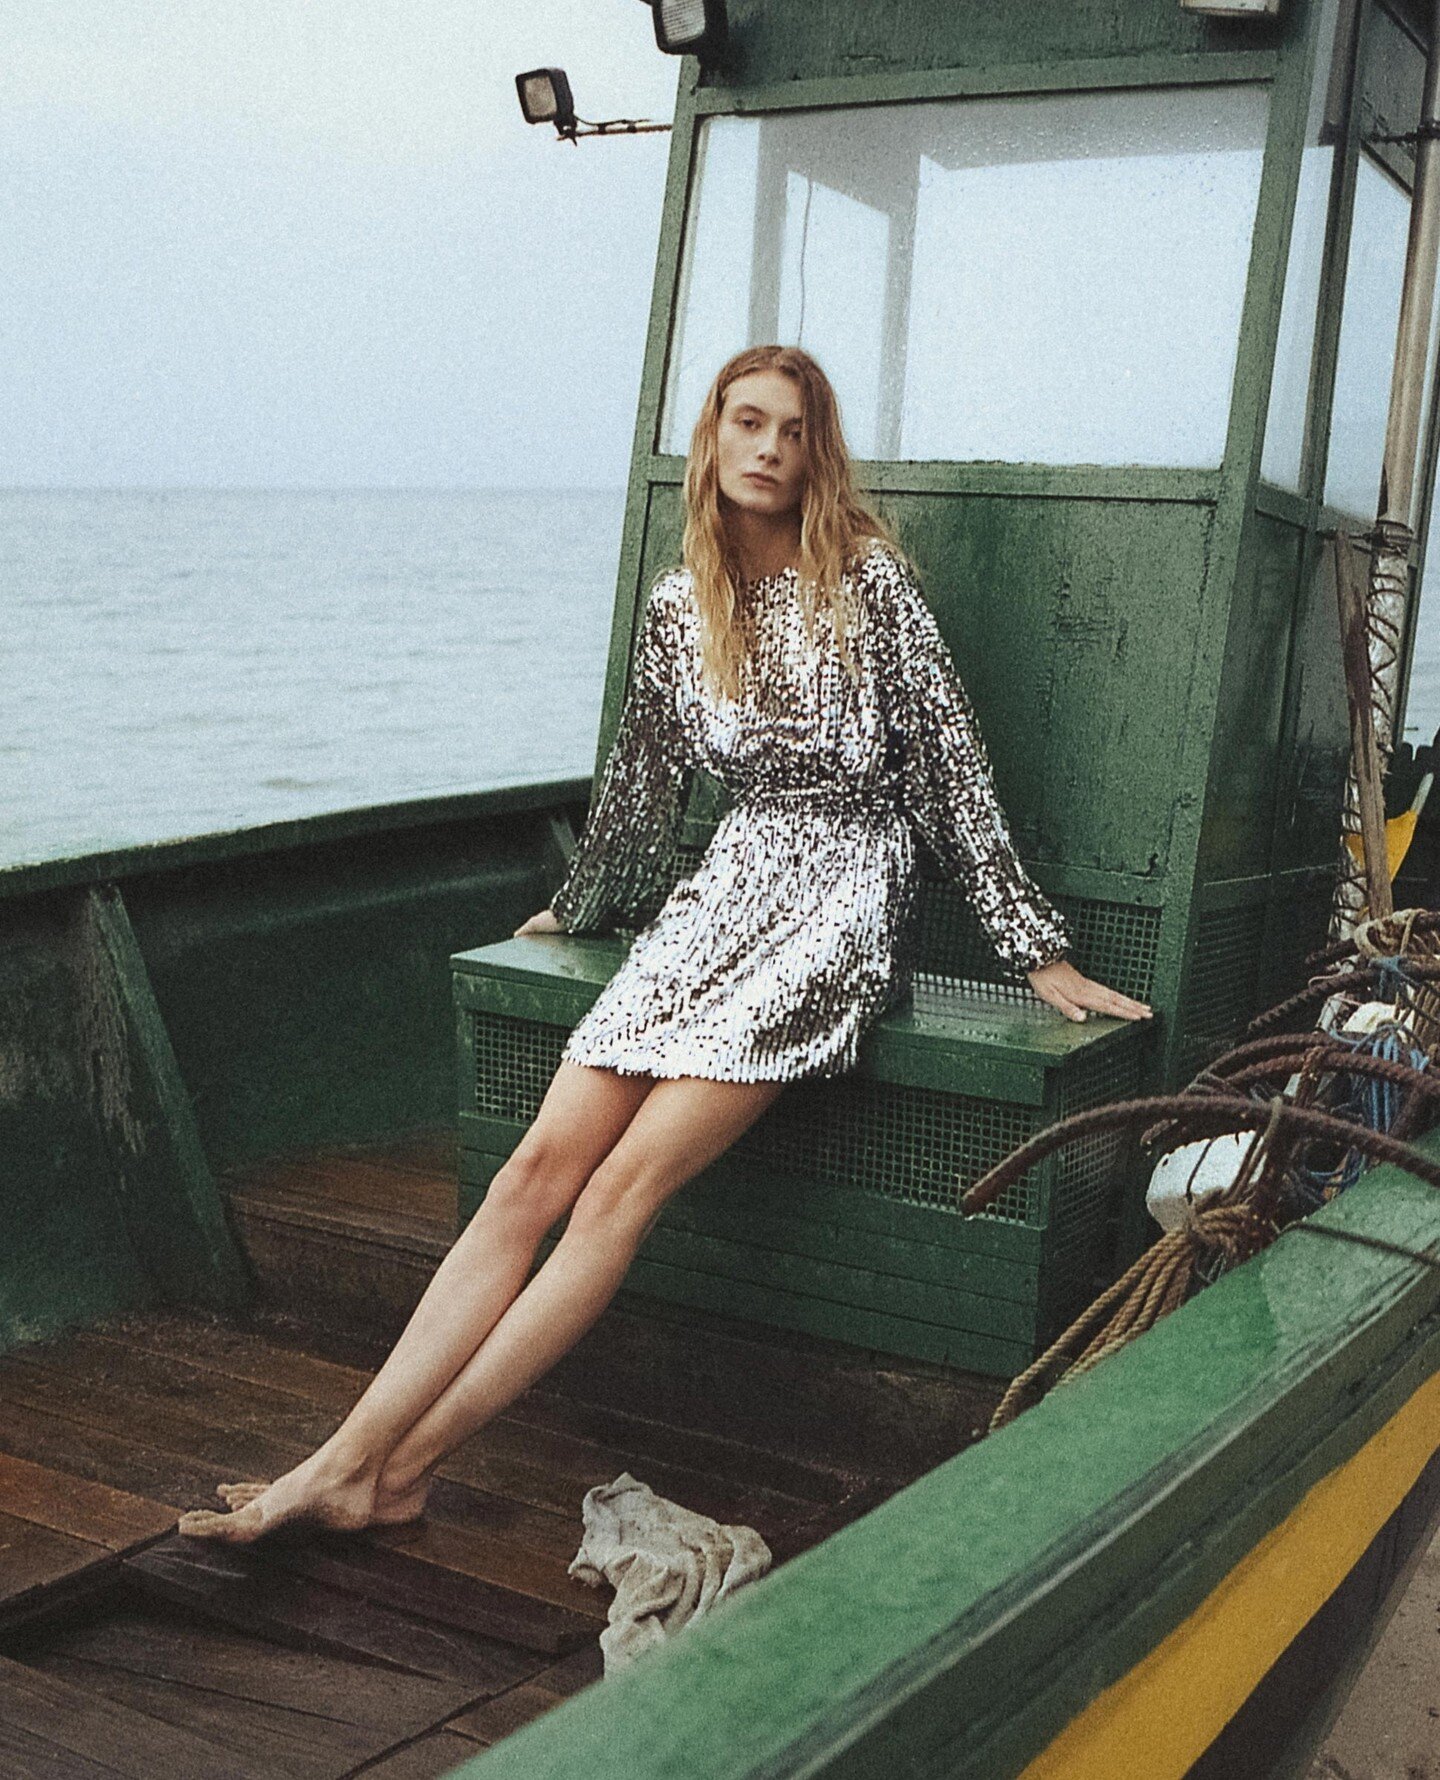 From our latest editorial &quot;The Storm on the Sea&quot; by Peter Seyna 🌊 Check out the full photoshoot with the link in bio, along with a poem by Peter himself #IntercruMag⁠
&bull;⁠
&bull;⁠
&bull;⁠
Photographer @peterseyna⁠
Model @i_am_nessy⁠
Mod